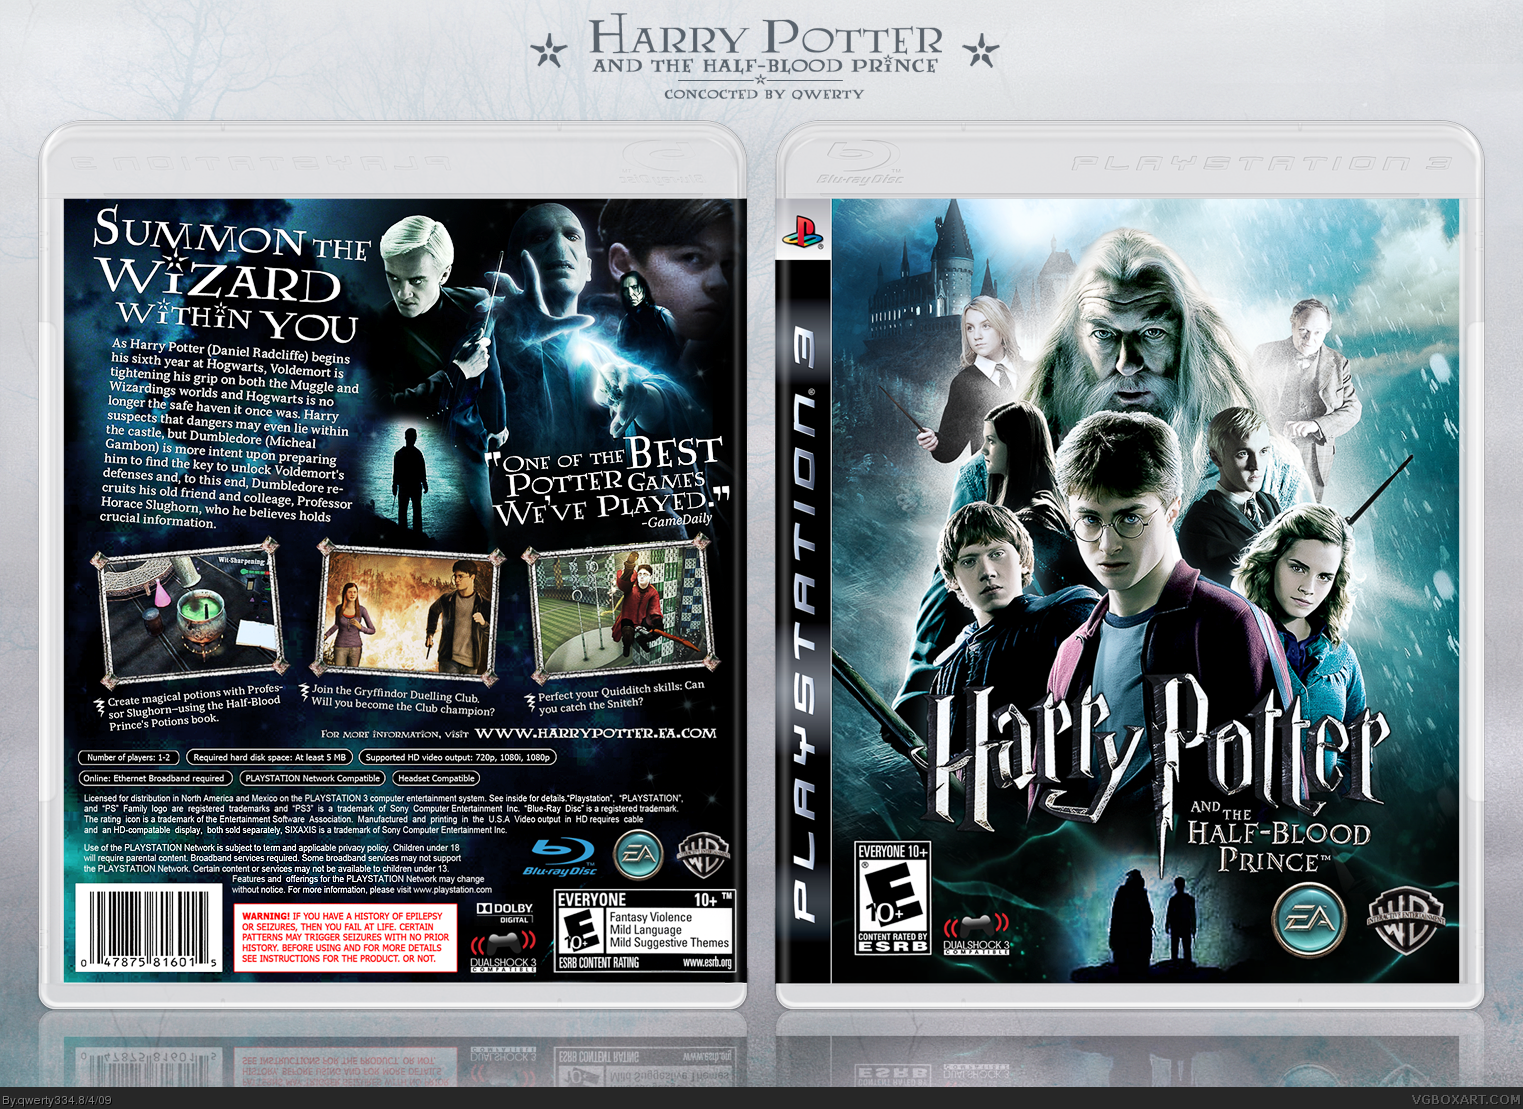 Harry Potter and the Half-Blood Prince box cover